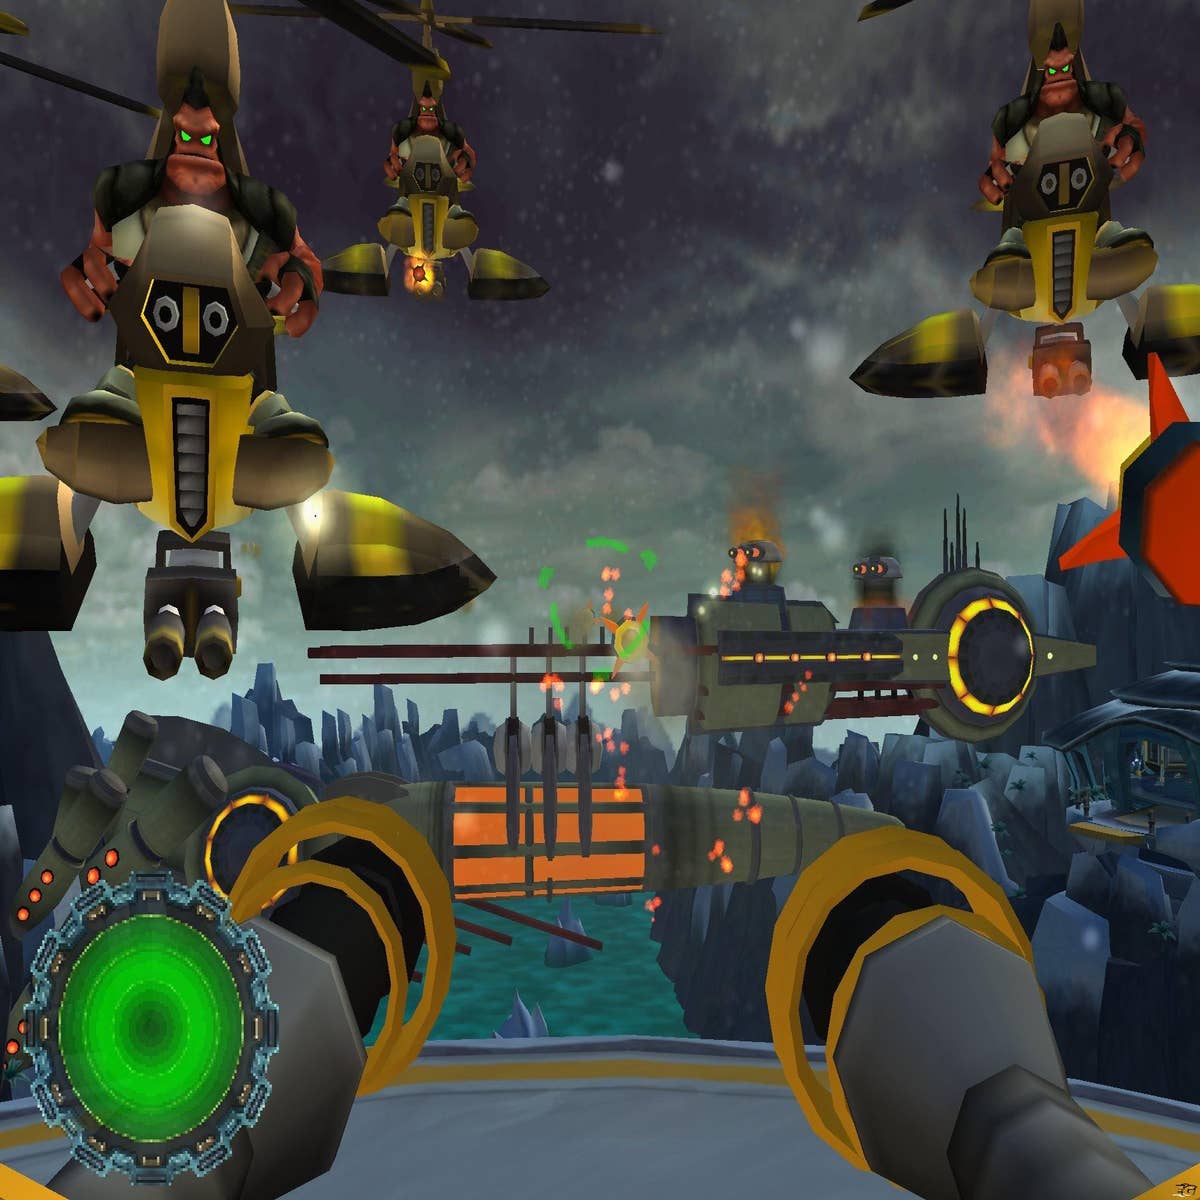 Ratchet and Clank (Ps2 original) Review Gameplay 6/10, Story 8/10